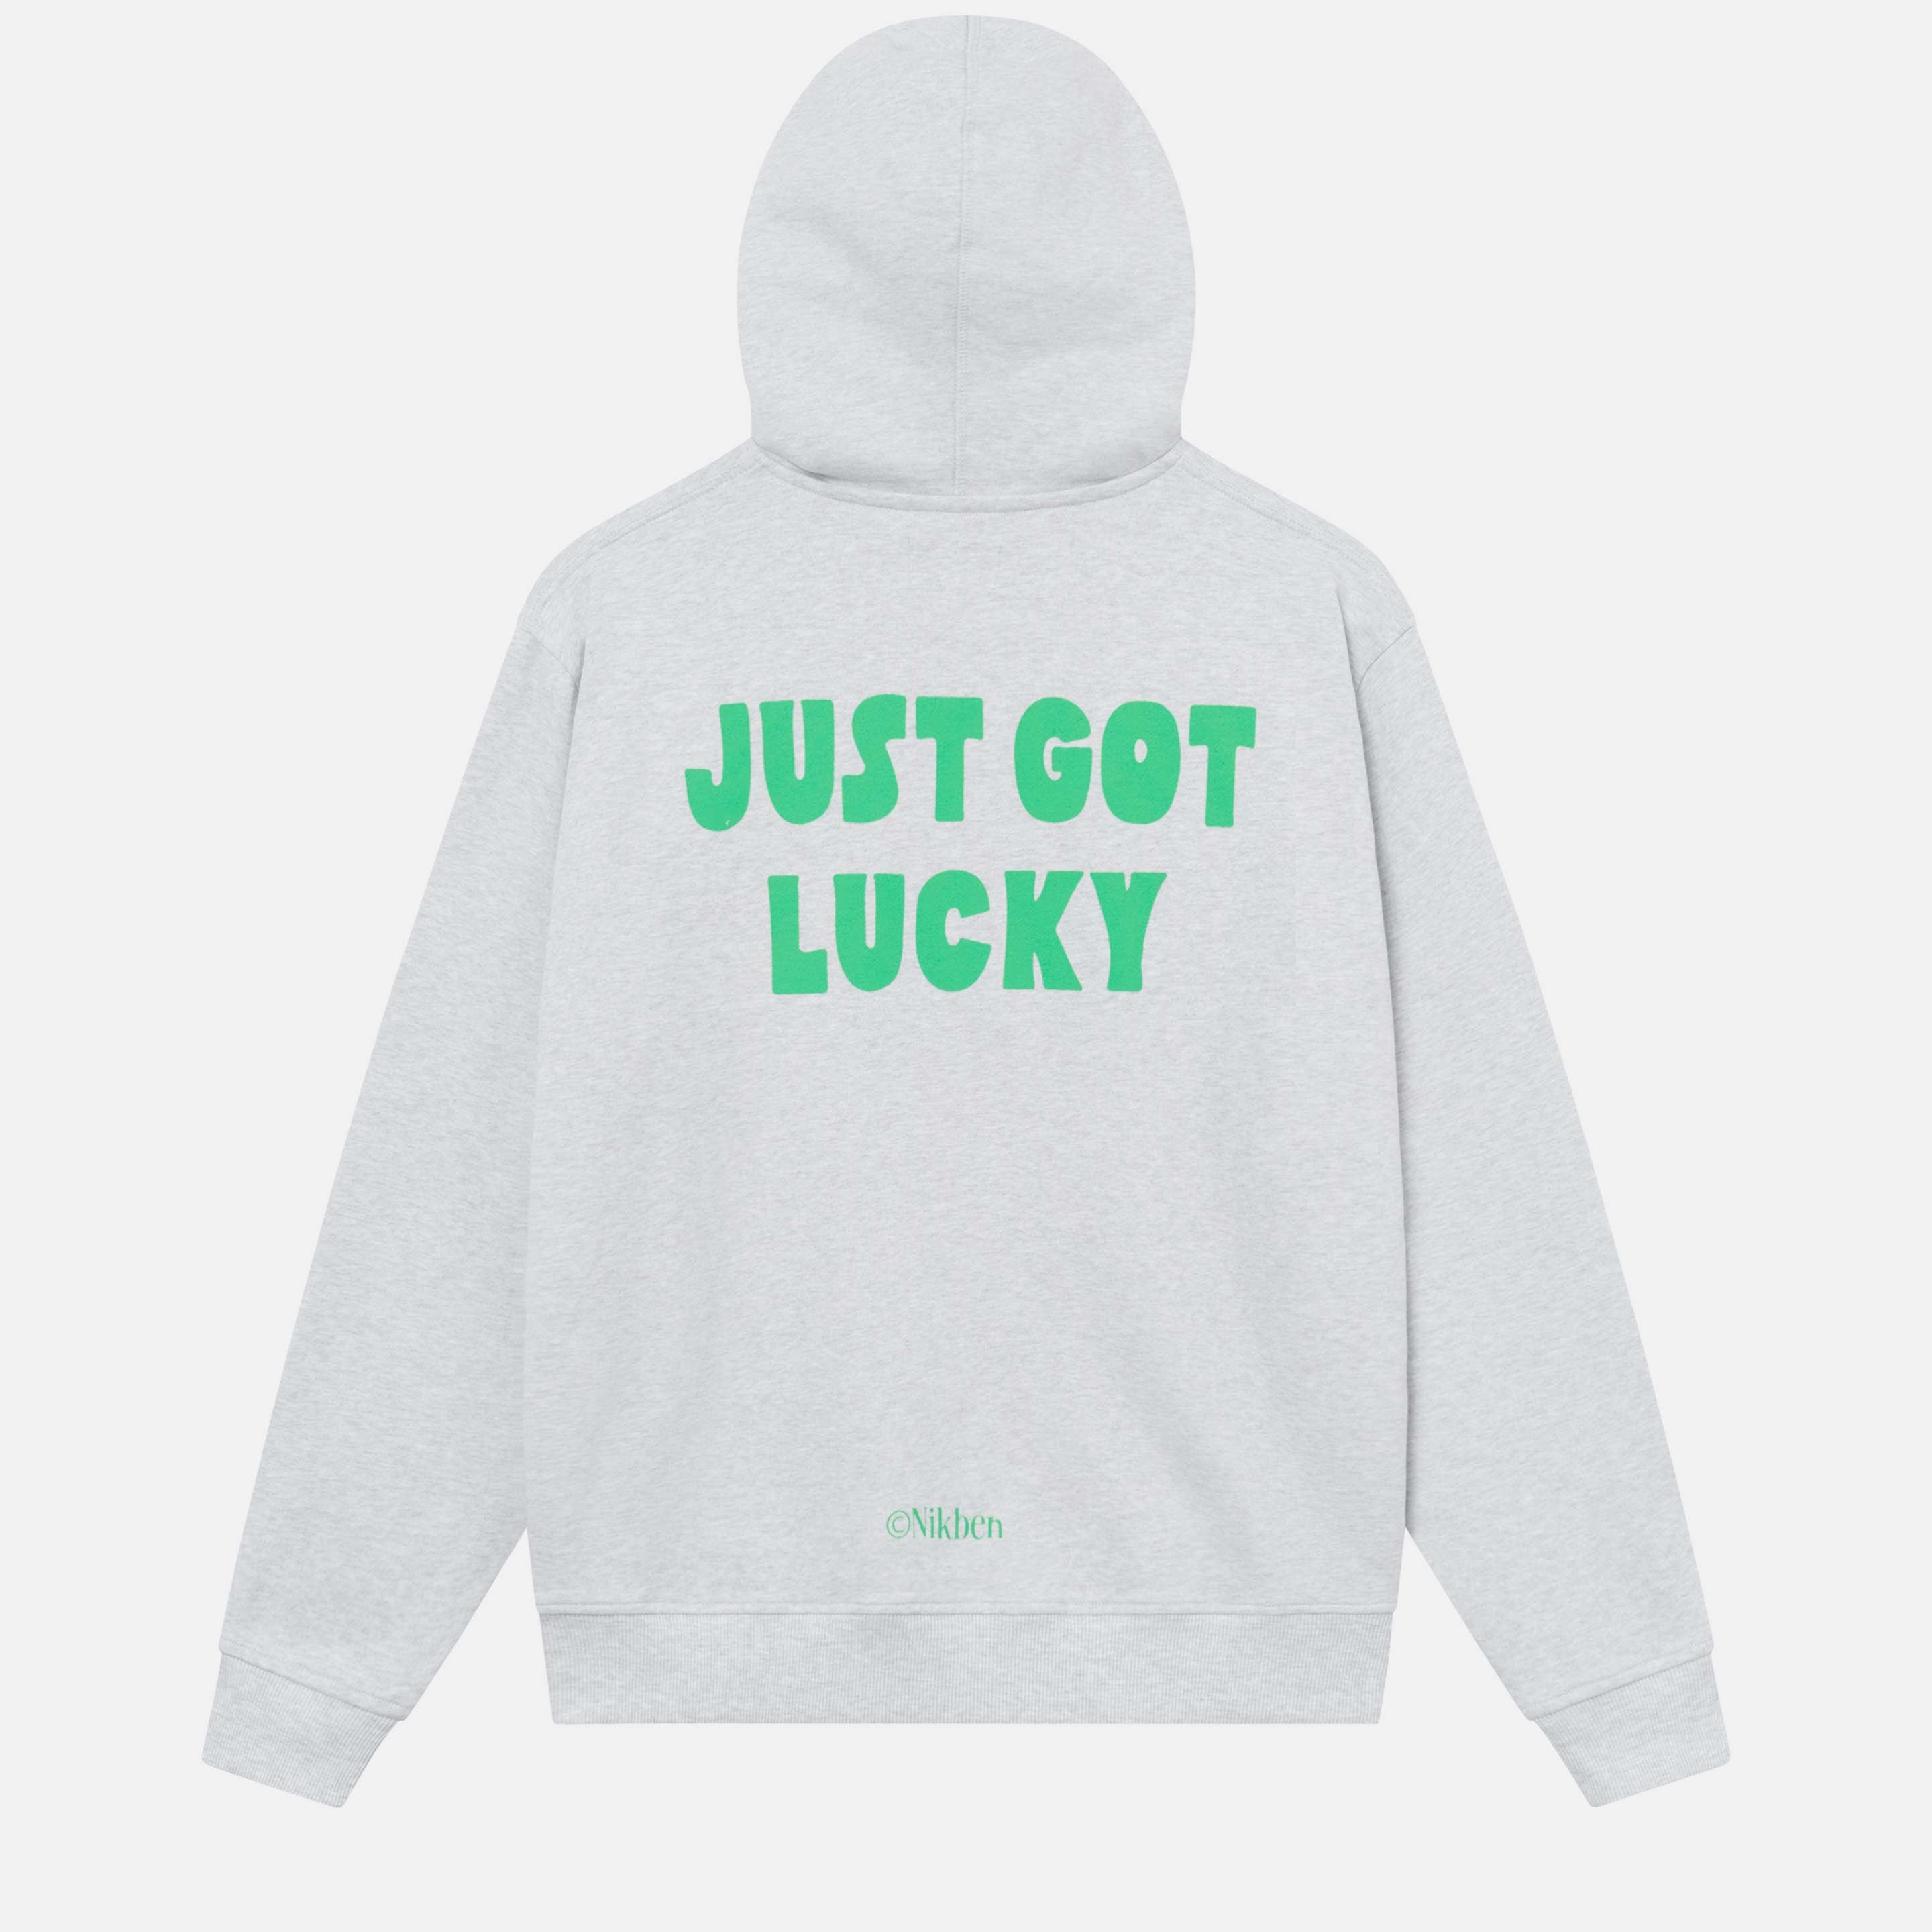 Grey hoodie with a large green "Just got lucky" text print on its back